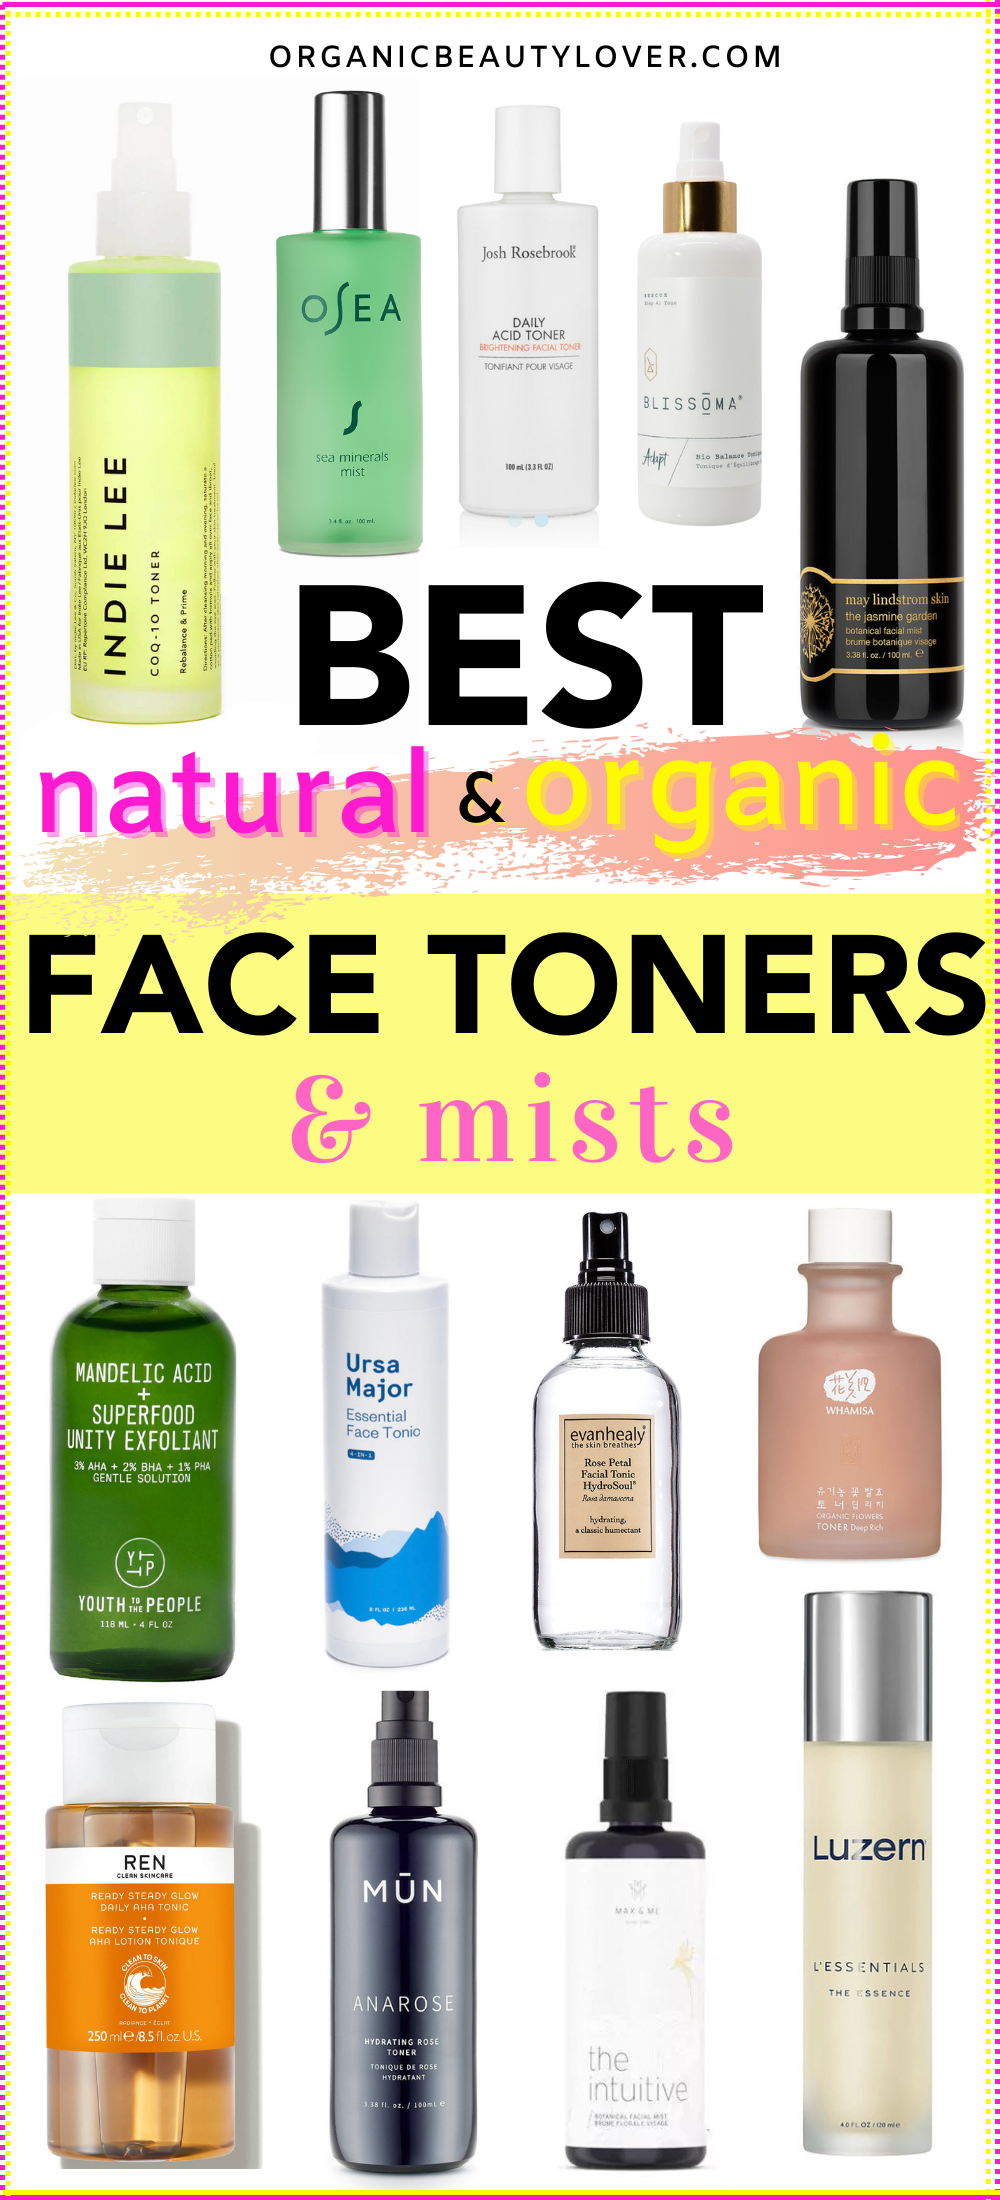 Best Natural & Organic Toners for Every Skin Type